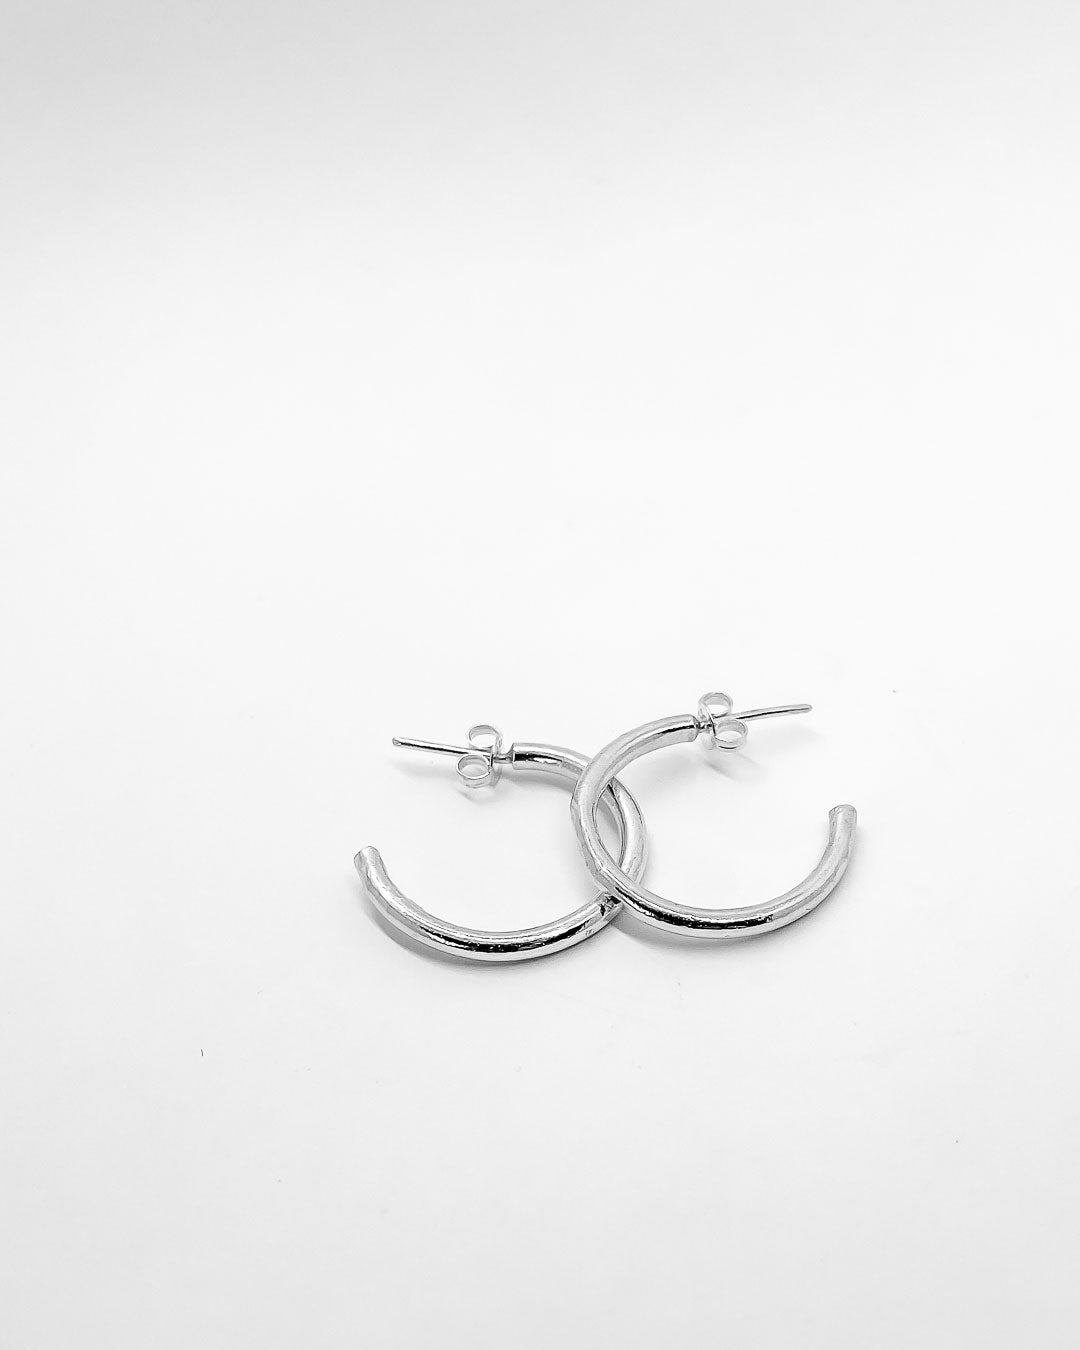 A pair of Sterling Silver Hoop earrings overlapping on a white surface